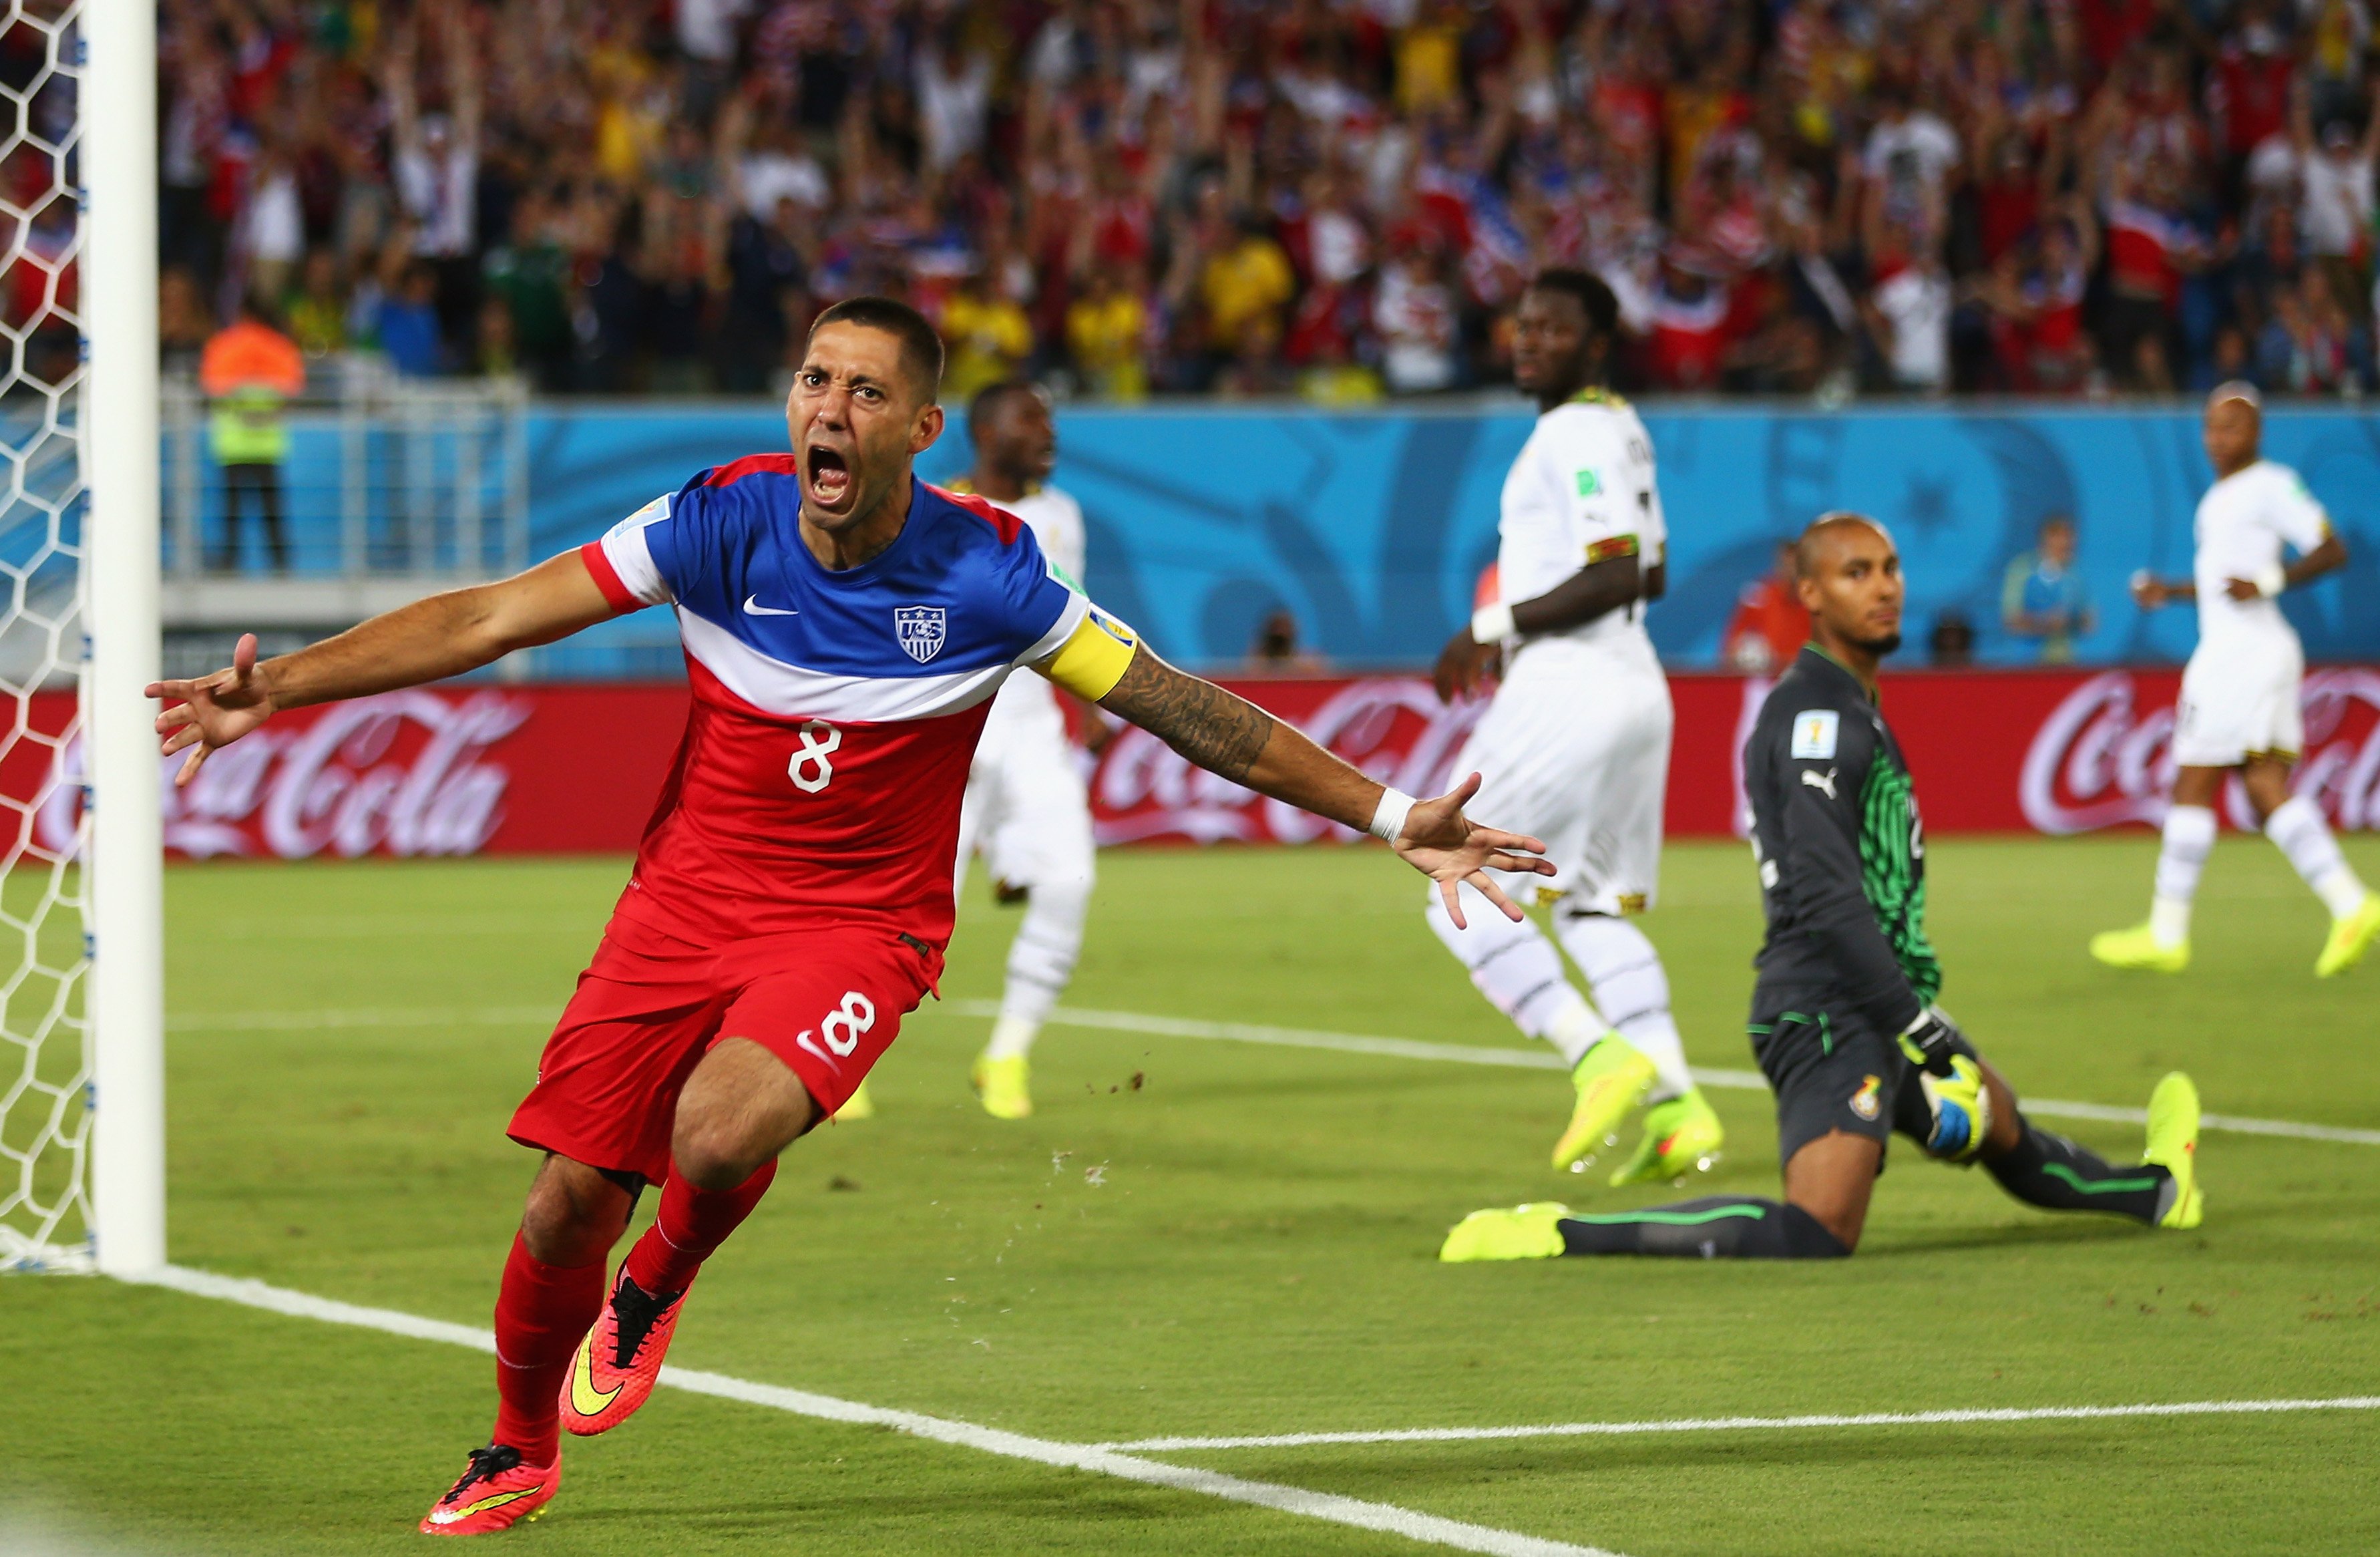 Clint Dempsey of the United States reacts after scoring his team's first goal past goalkeeper Adam Kwarasey of Ghana during the 2014 FIFA World Cup Brazil Group G match between Ghana and the United States at Estadio das Dunas on June 16, 2014 in Natal, Brazil.